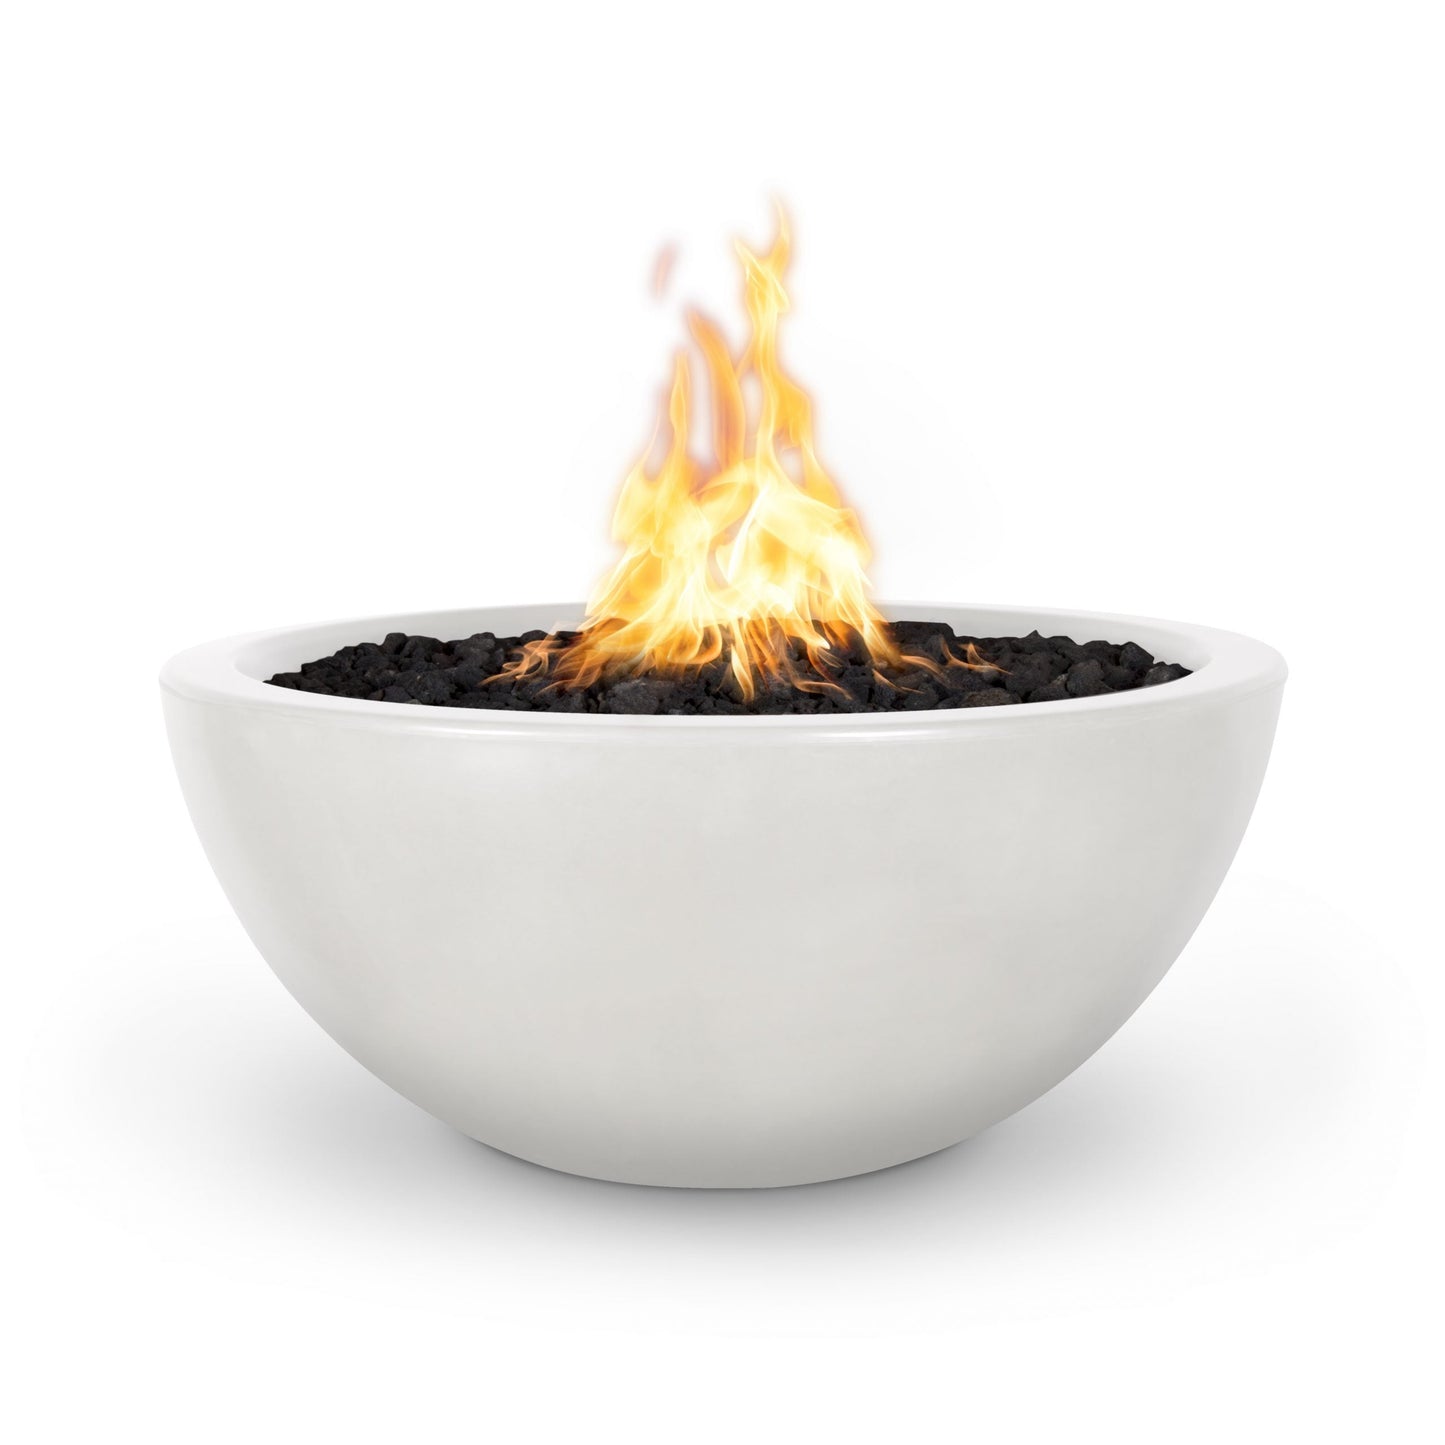 The Outdoor Plus Round Luna 30" Rustic Coffee GFRC Concrete Natural Gas Fire Bowl with Match Lit with Flame Sense Ignition